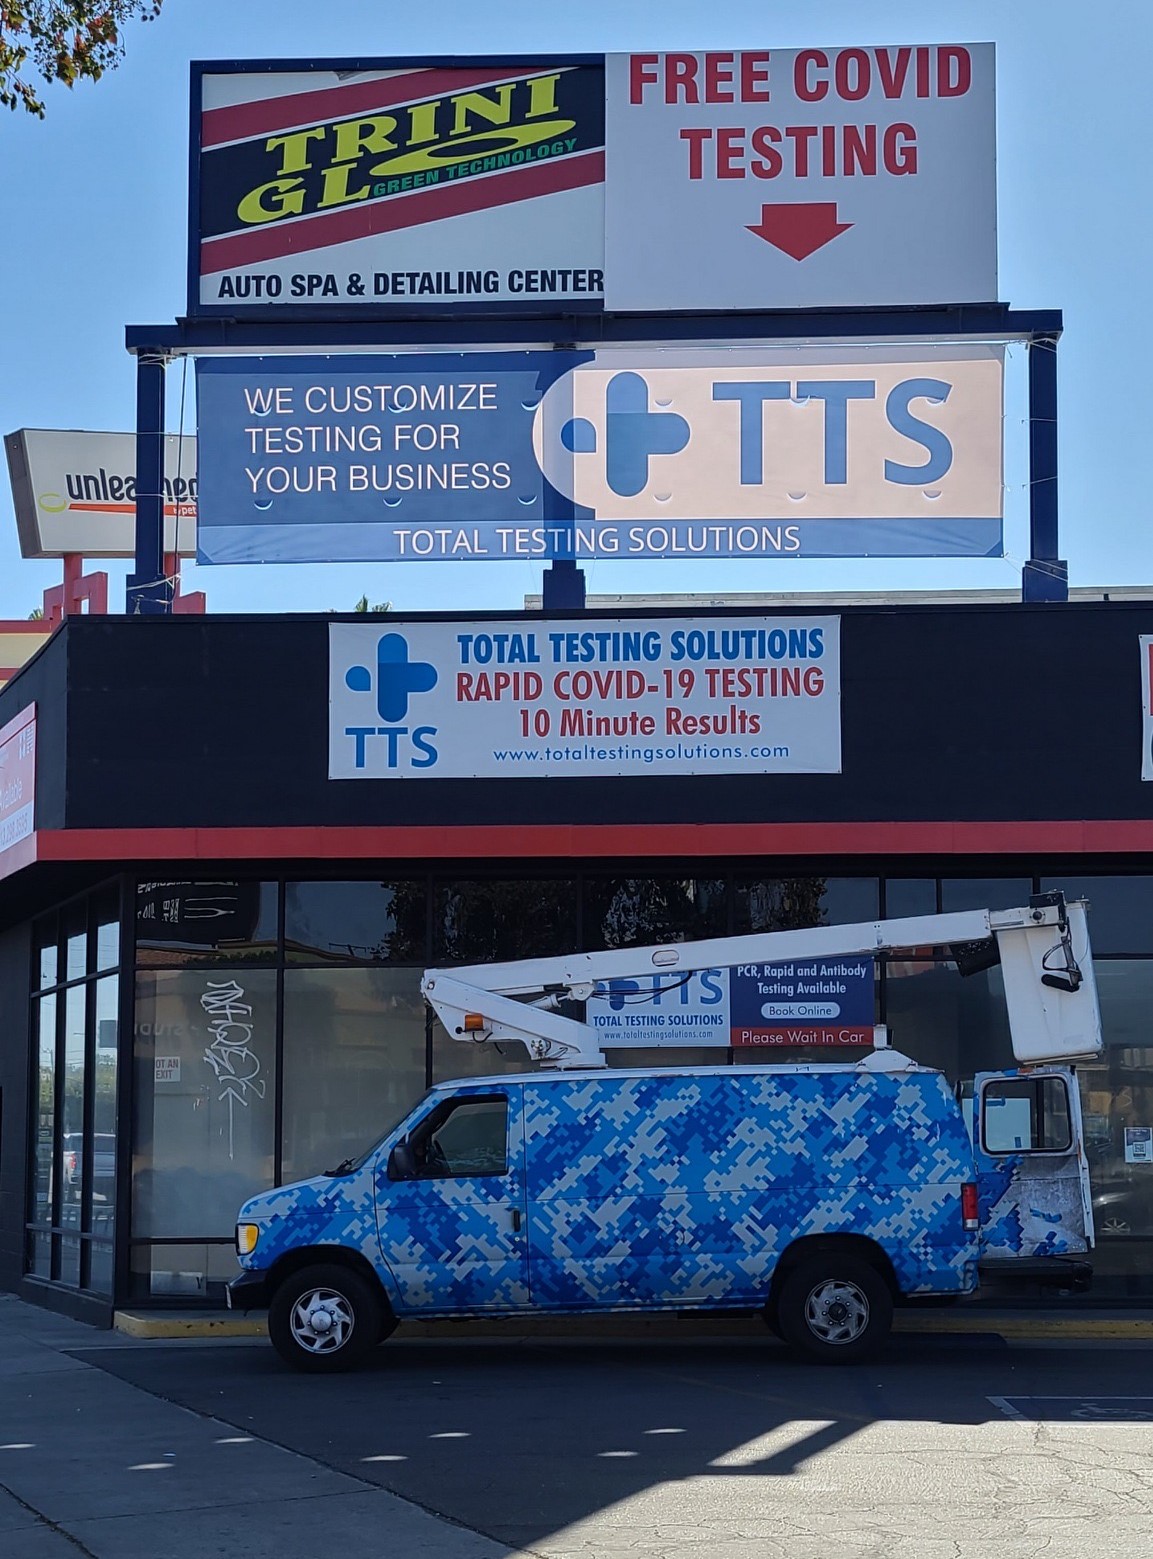 With this large billboard banner, Total Testing Solutions' North Hollywood branch will raise awareness of their free COVID testing services.